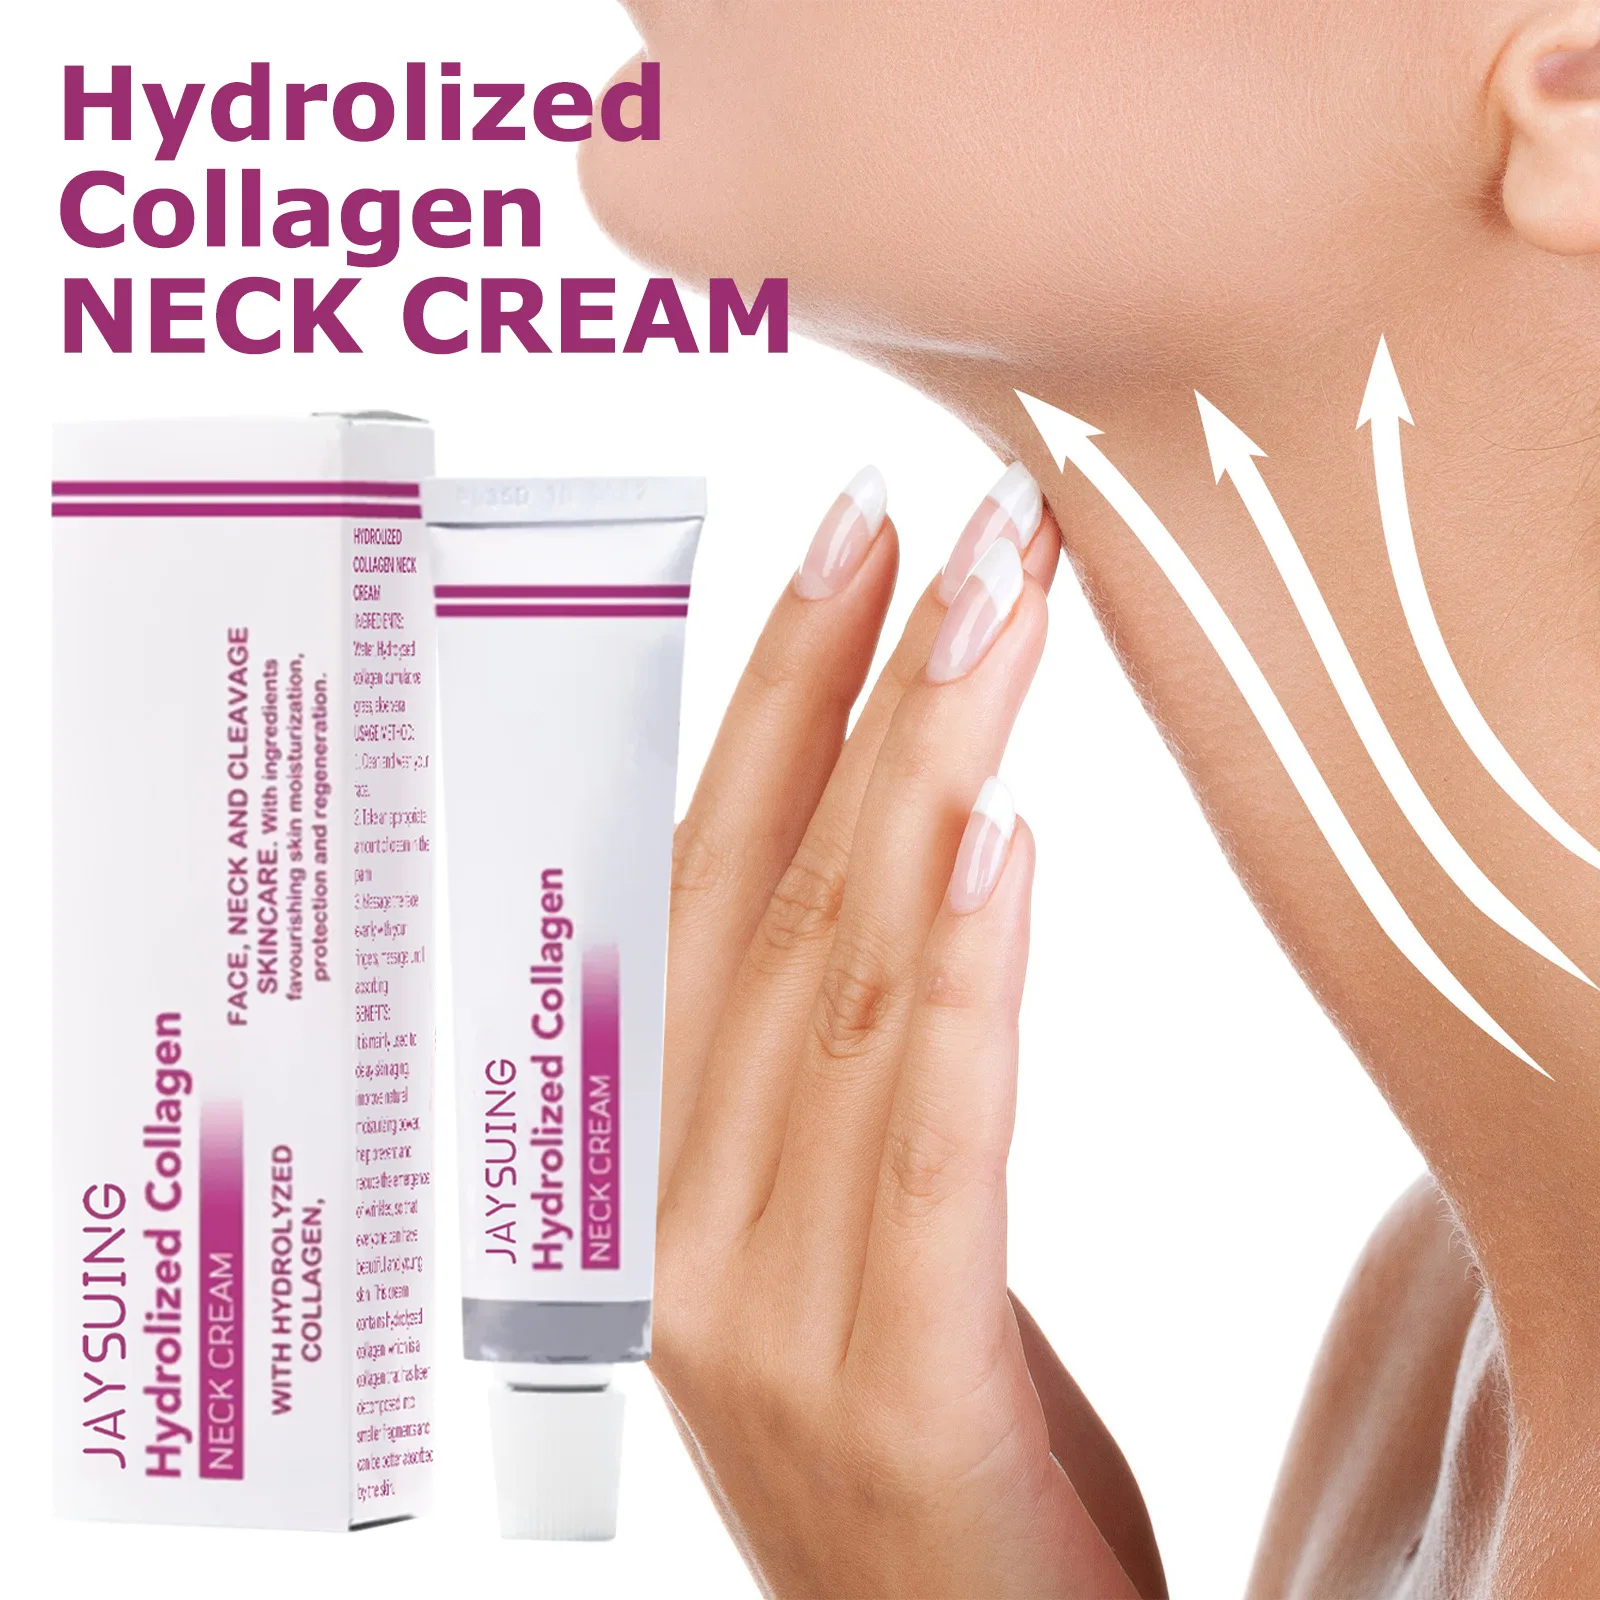 Hydrolyzed Collagen Neck Cream smooths and whitens, smooths and fades neck lines, and shapes a swan neck beautiful neck cream